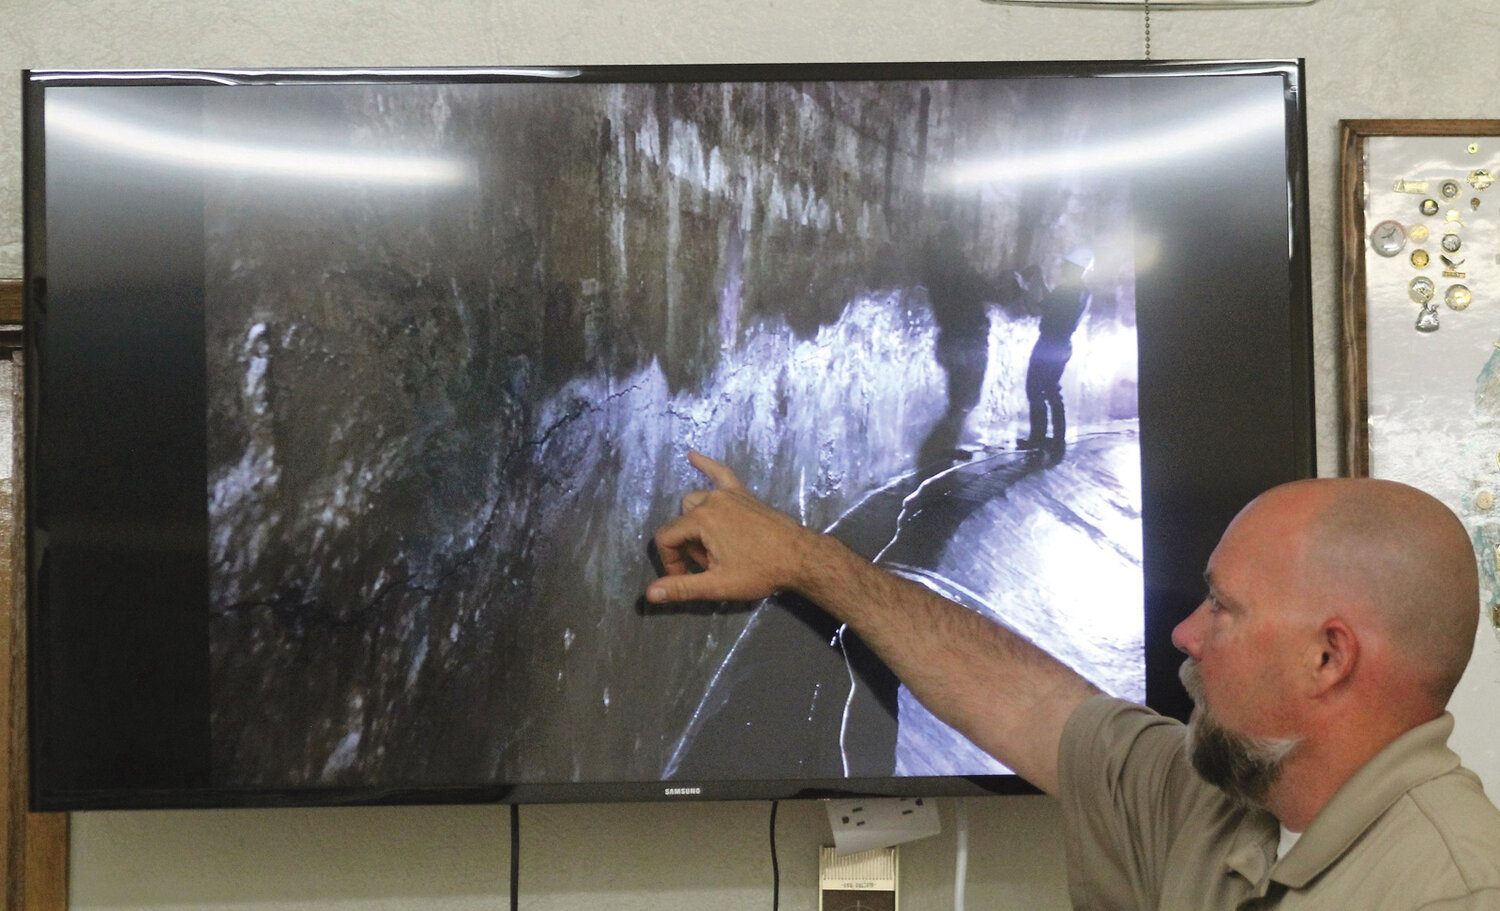 Photo By Mike Maltais
Brewster public works director, Lee Webster points to some interior damage found during a recent inspection of the city’s old water tank.